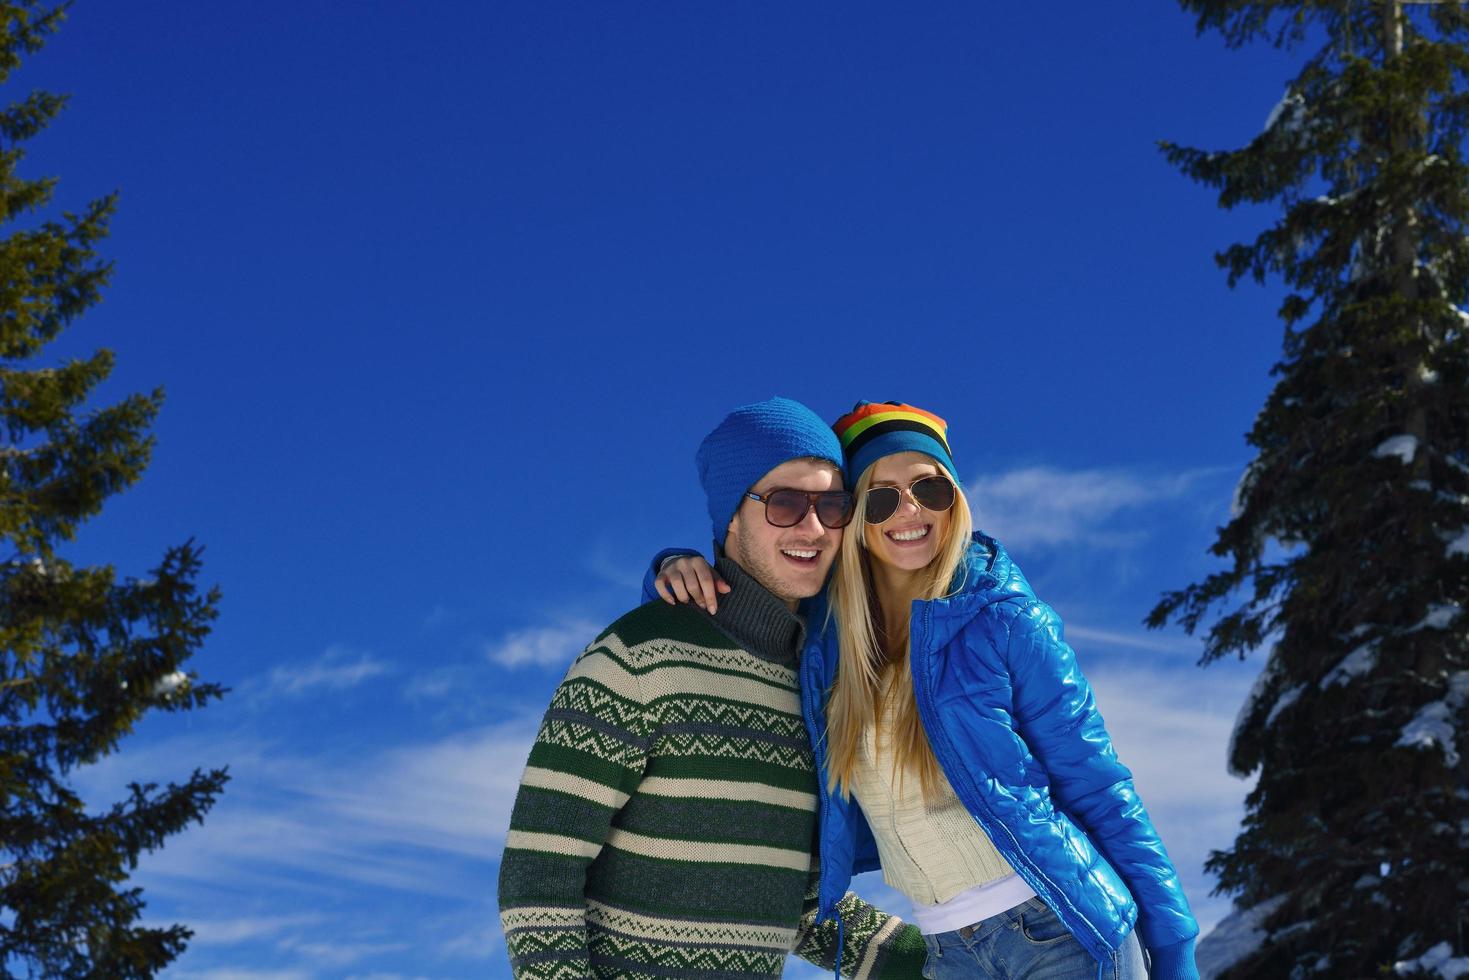 young couple on winter vacation photo